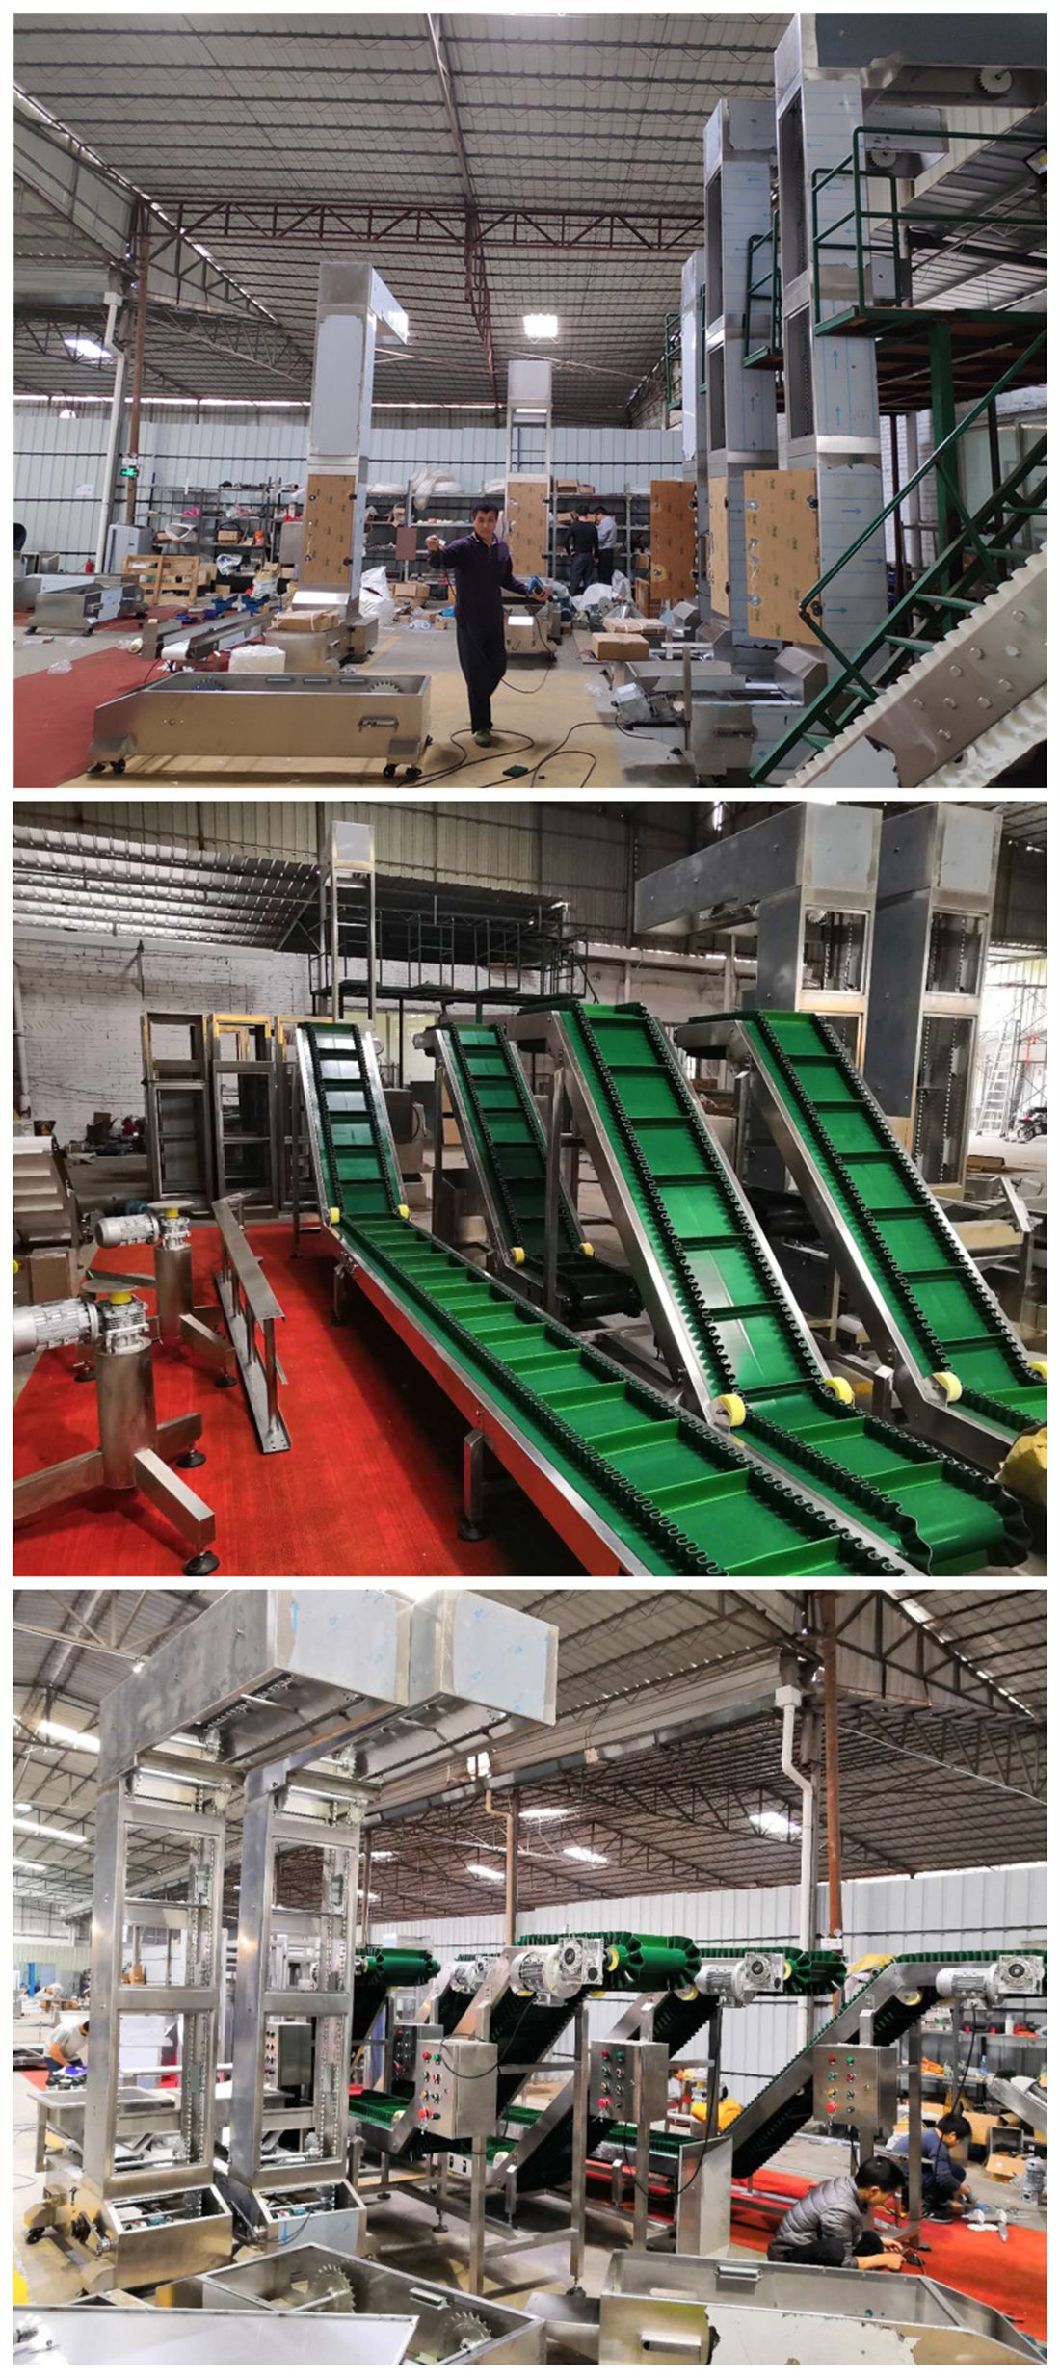 Stainless Steel Vibrating Feeder for Conveyors